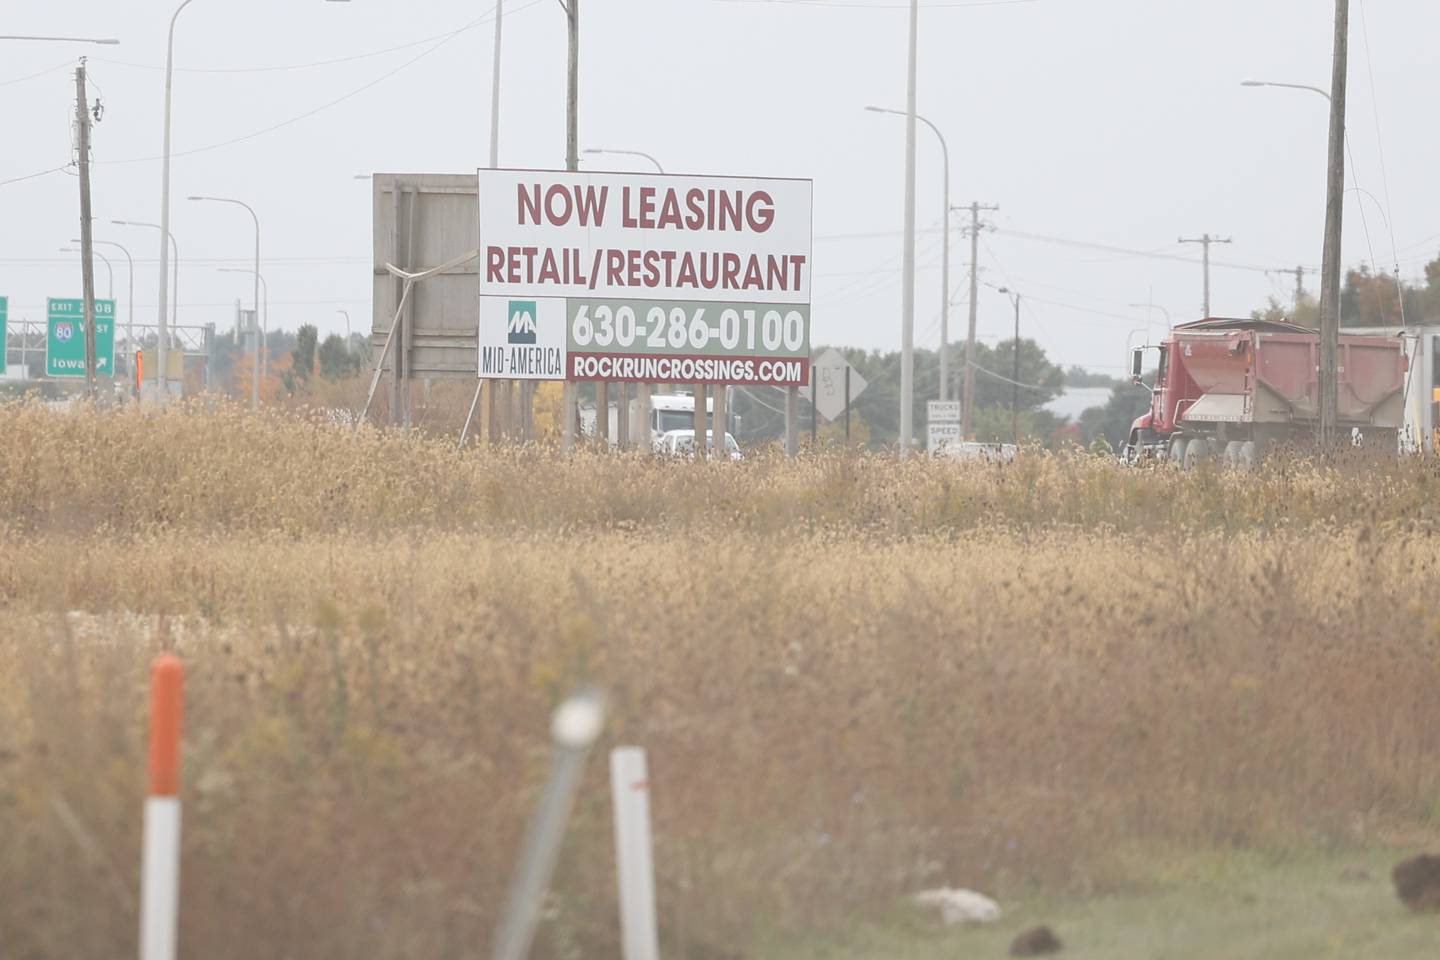 A sign advertising leasing sits along SE I-55 Frontage Road as groundwork continues on the Rock Run Crossings Development near the I-55 and I-80 interchange in Joliet on Tuesday, October 11th.